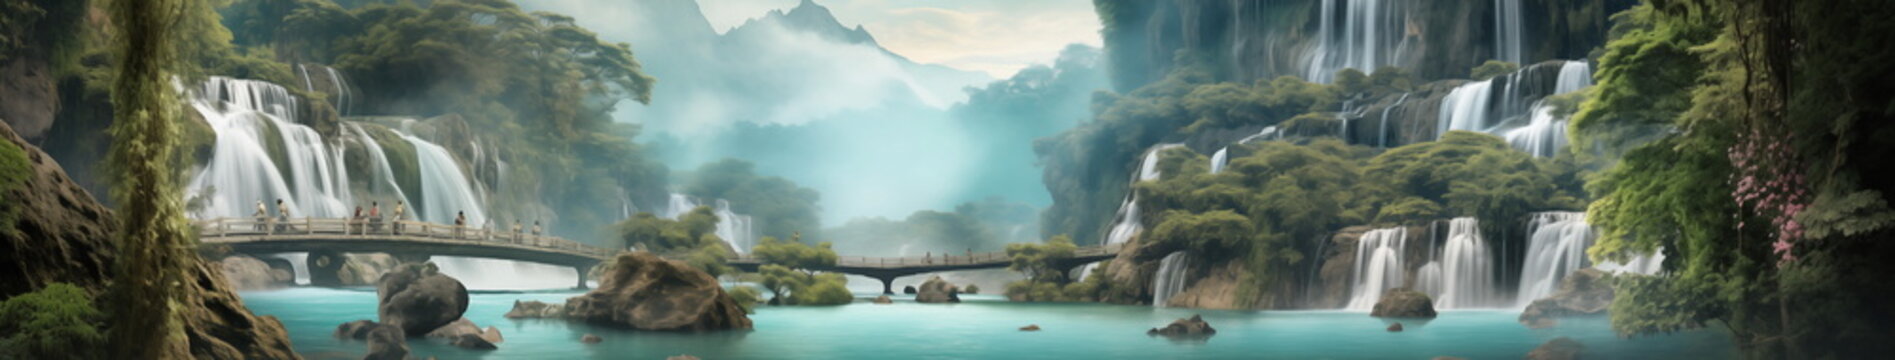 AI creates images, waterfalls, views The scenery, the landscape, is very beautiful.